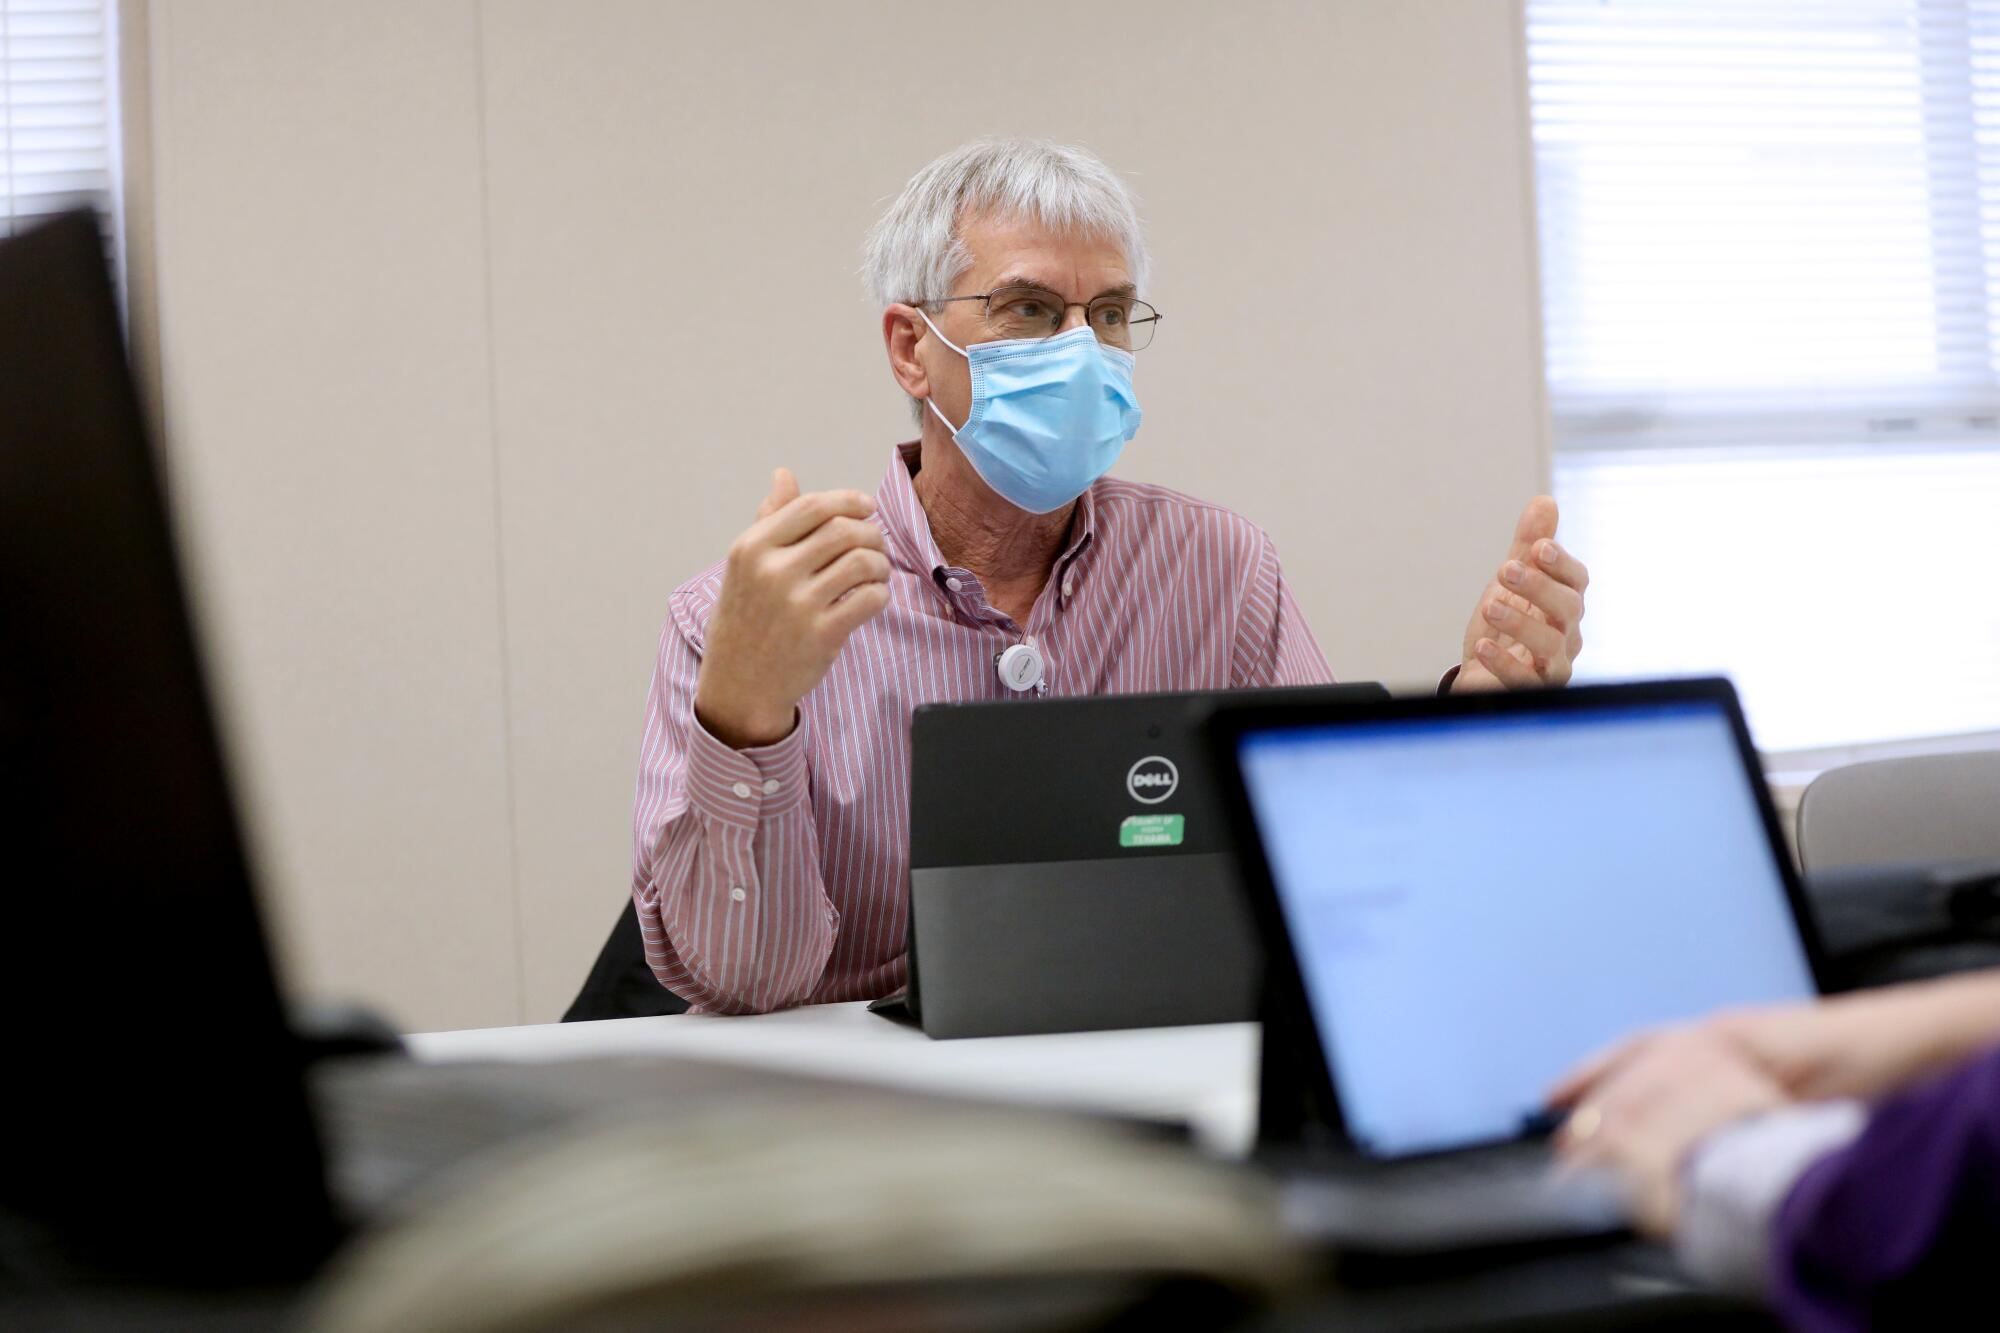 A man in glasses and a blue mask gestures while speaking at a conference table